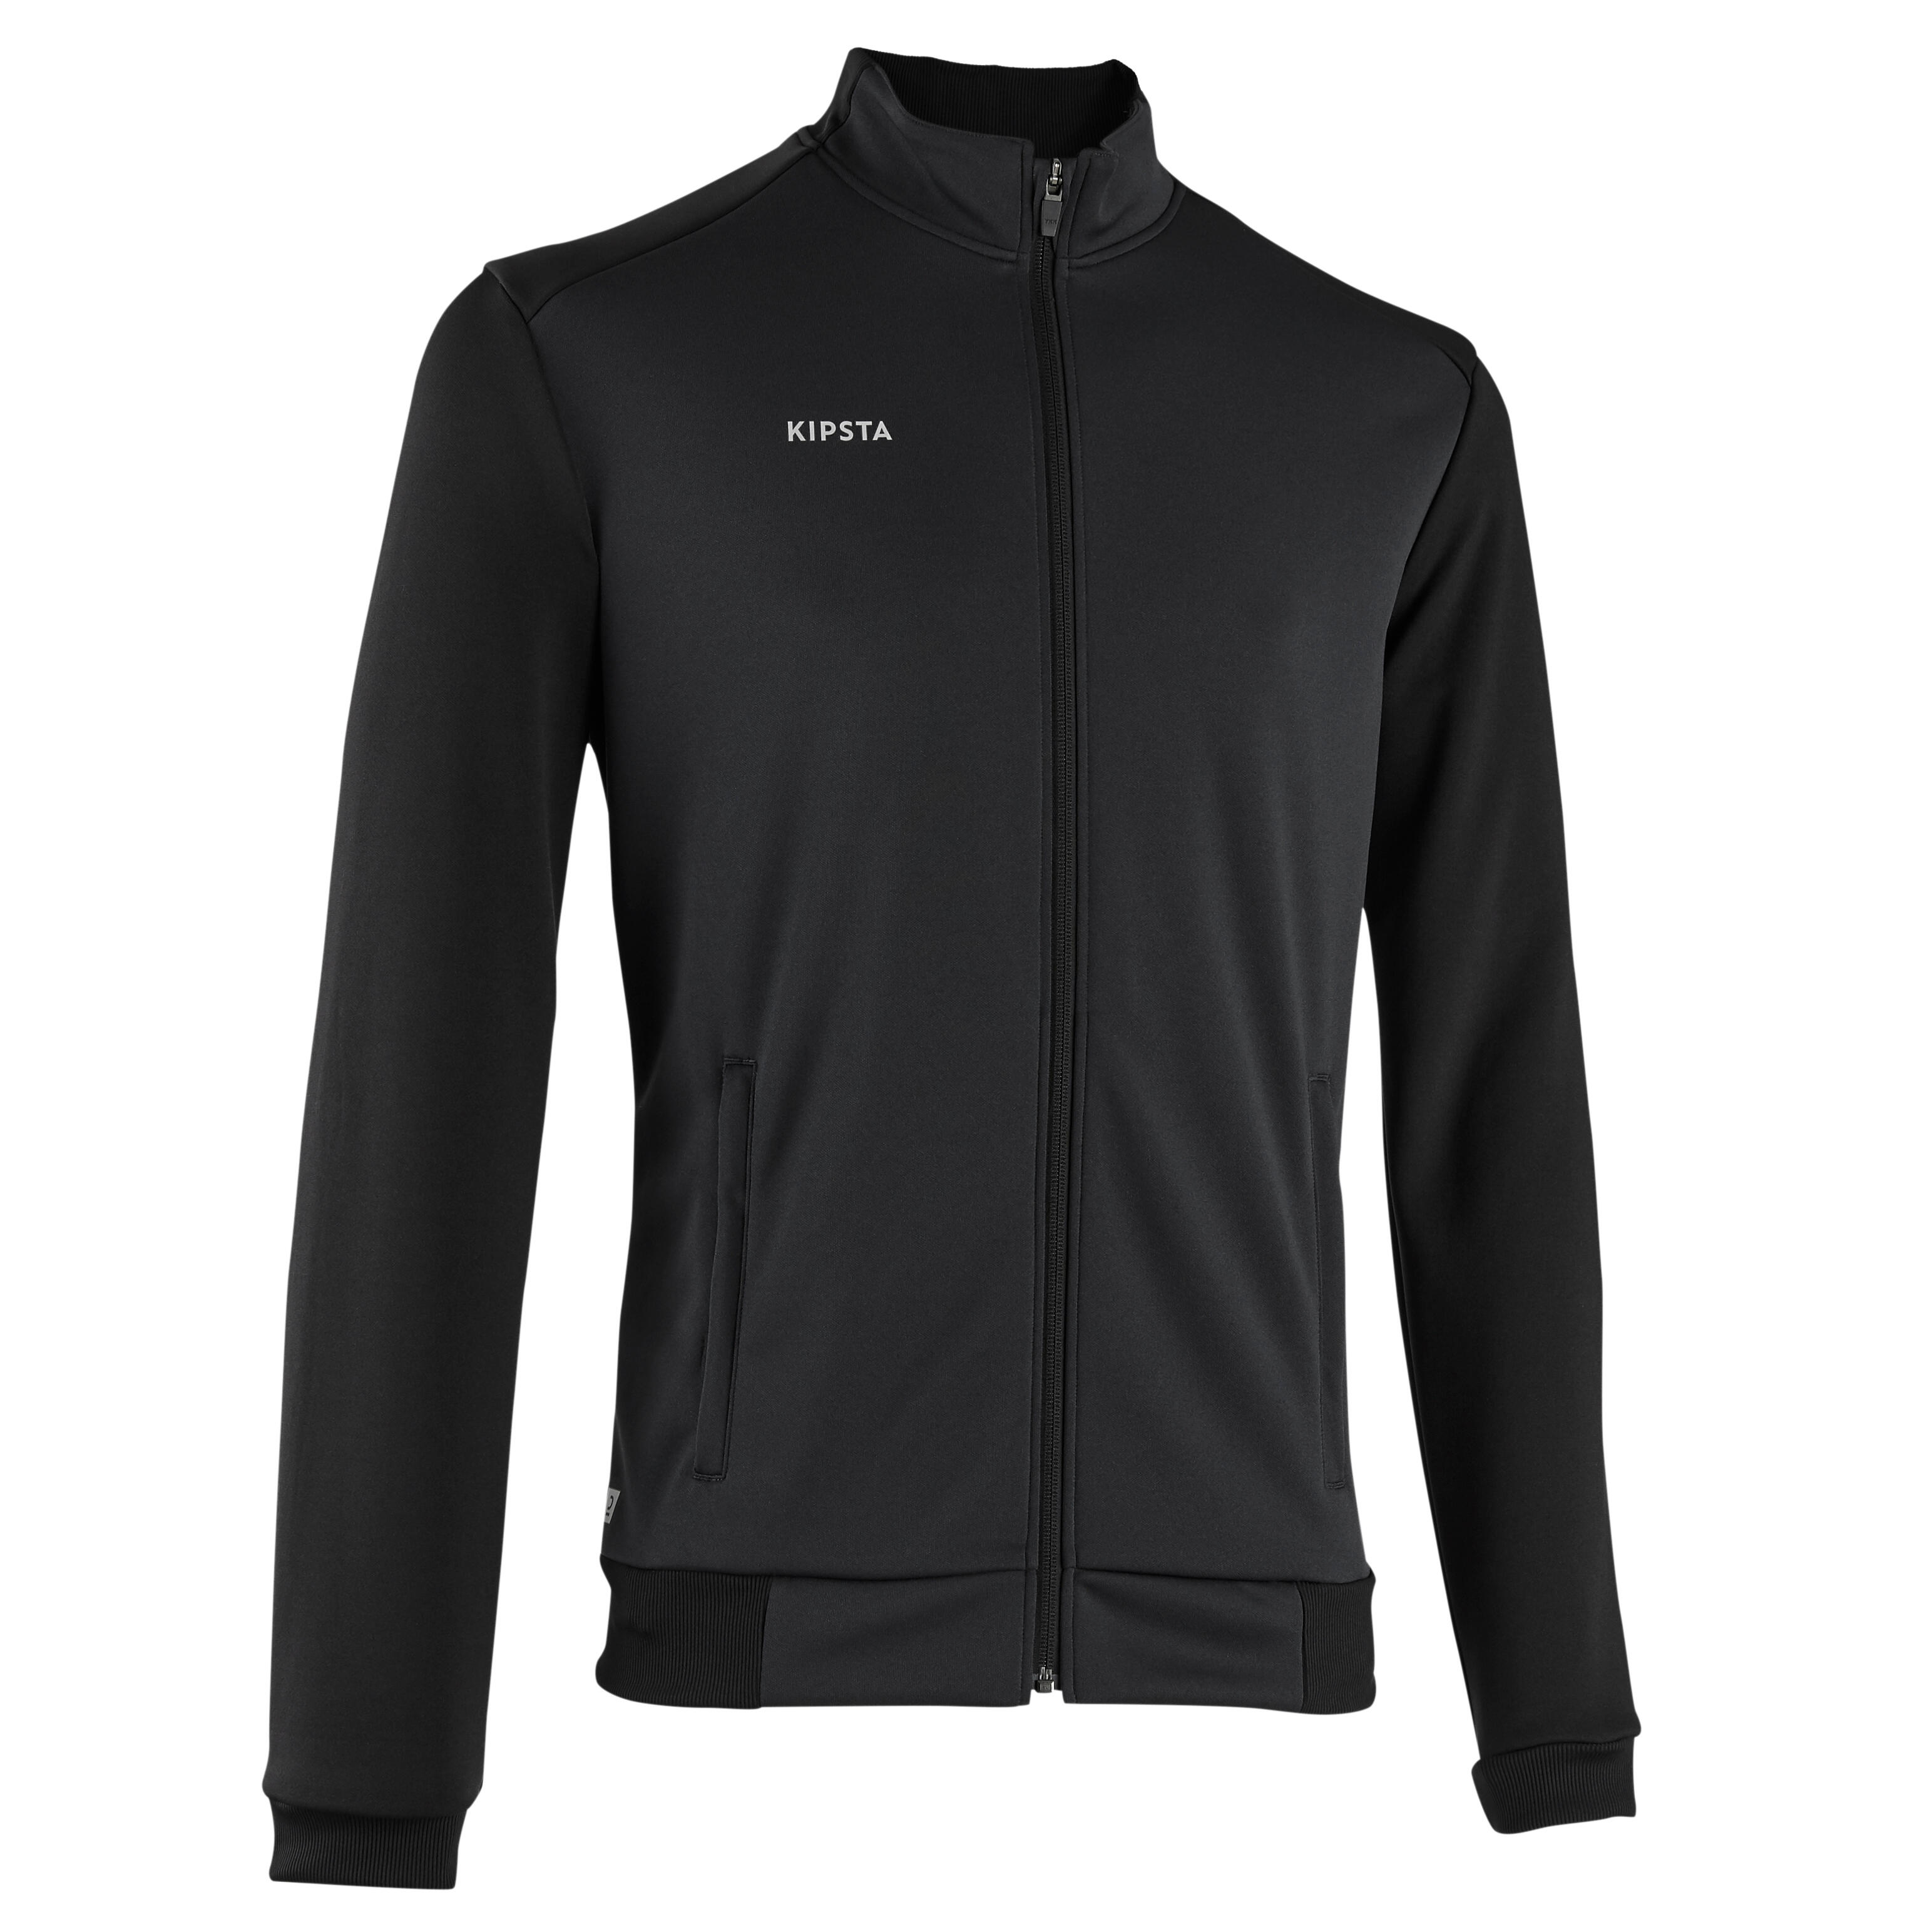 Decathlon Sports India - Explore our range of Winter Jackets Starting from  999. CLICK HERE TO CHECKOUT: https://bit.ly/3ec5DXq | Facebook